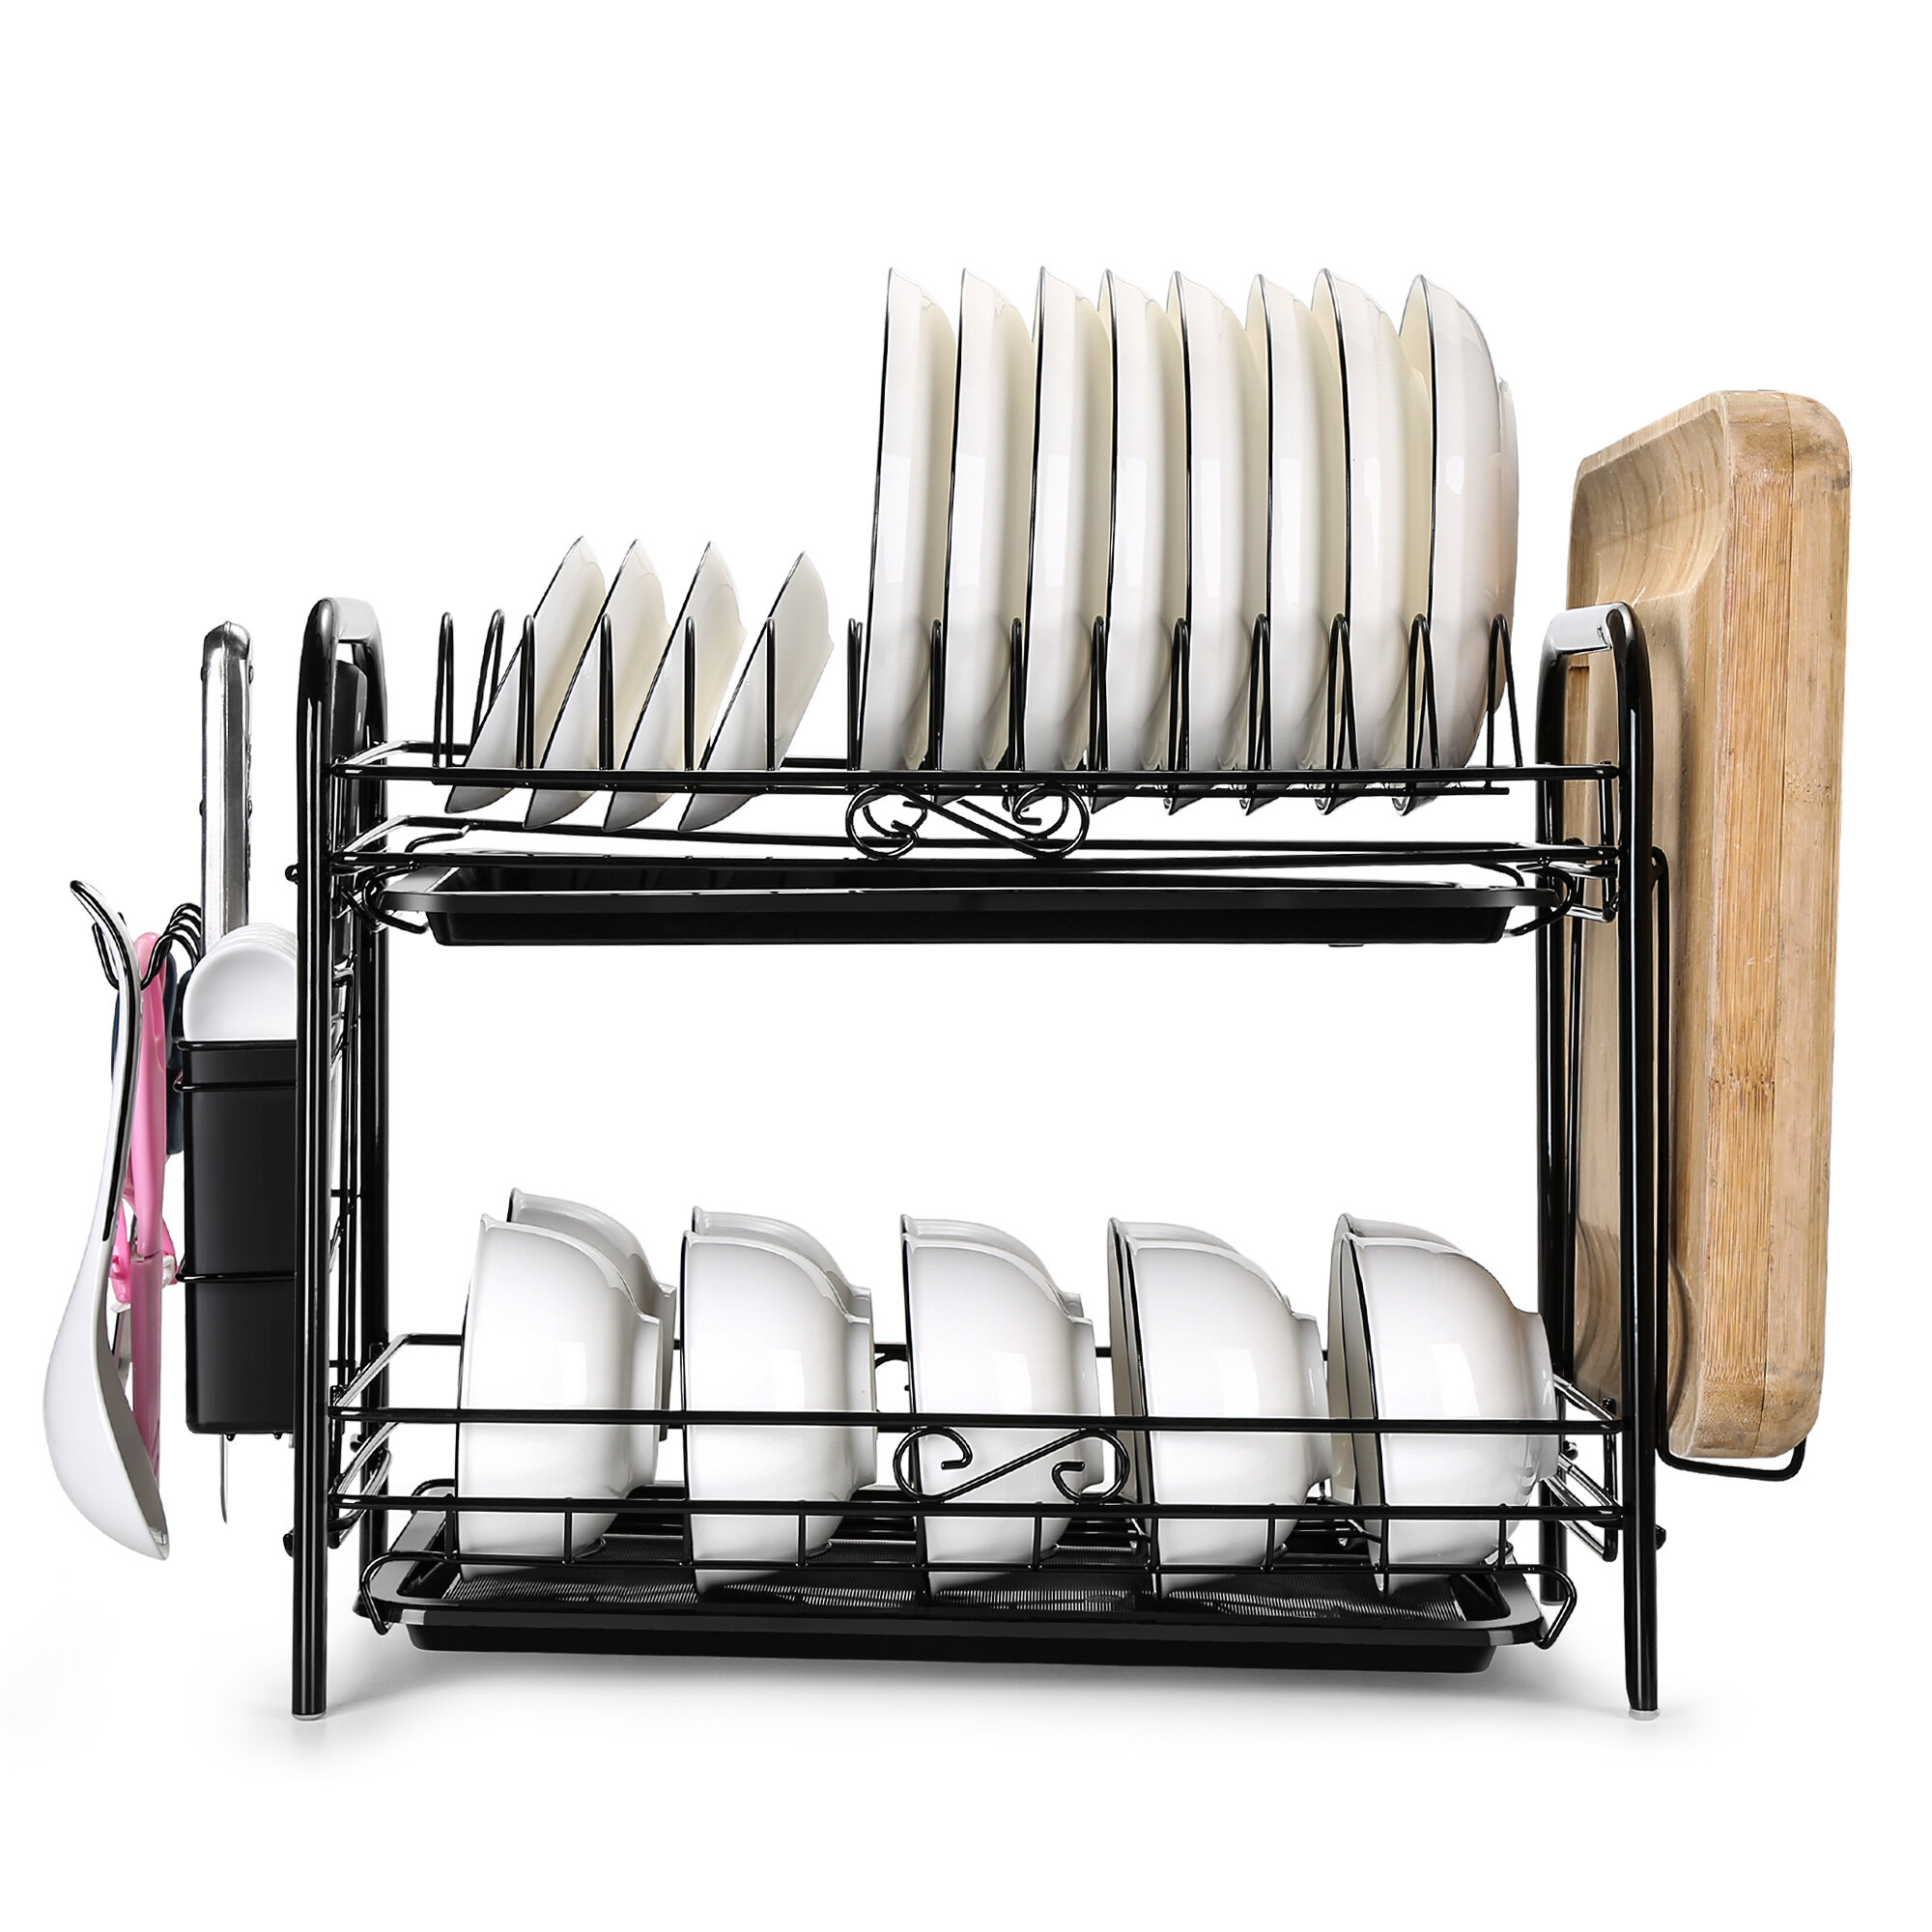 J&V Textiles x Shaped Stainless Steel 2-Tier Dish Rack with Utensil and Cutting Board Holder in Black | 247-BK